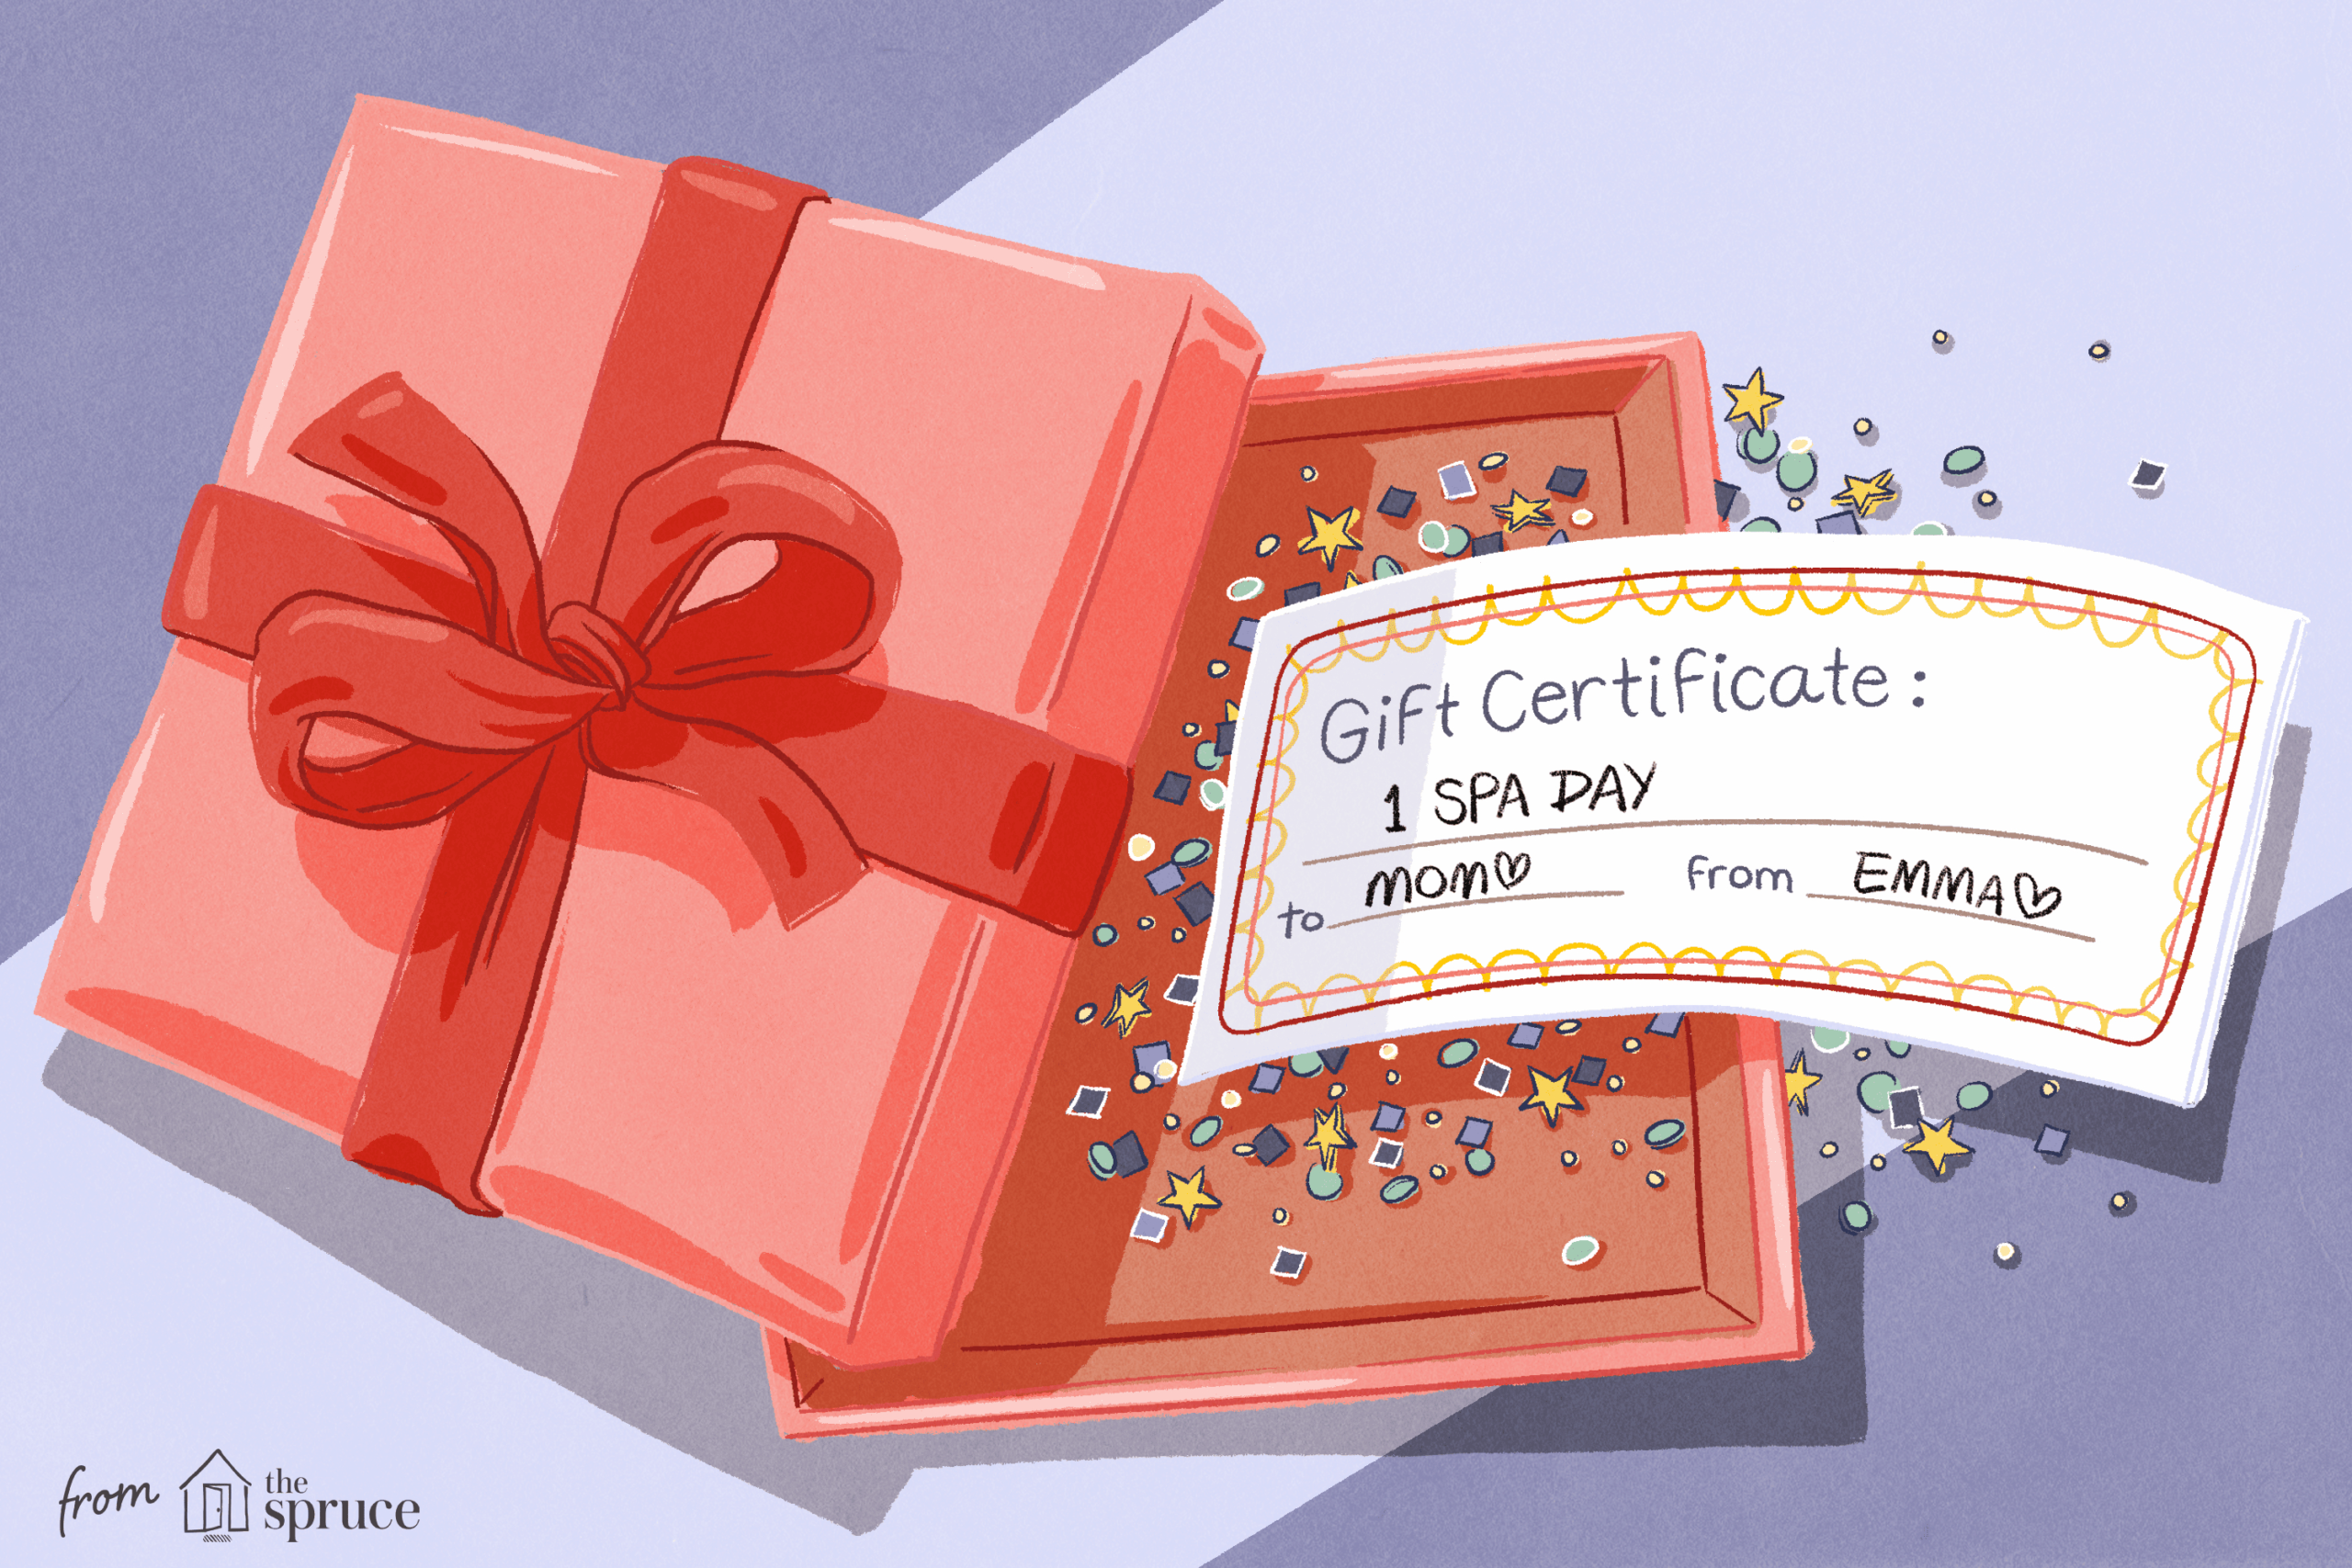 Free Gift Certificate Templates You Can Customize With Regard To Present Certificate Templates